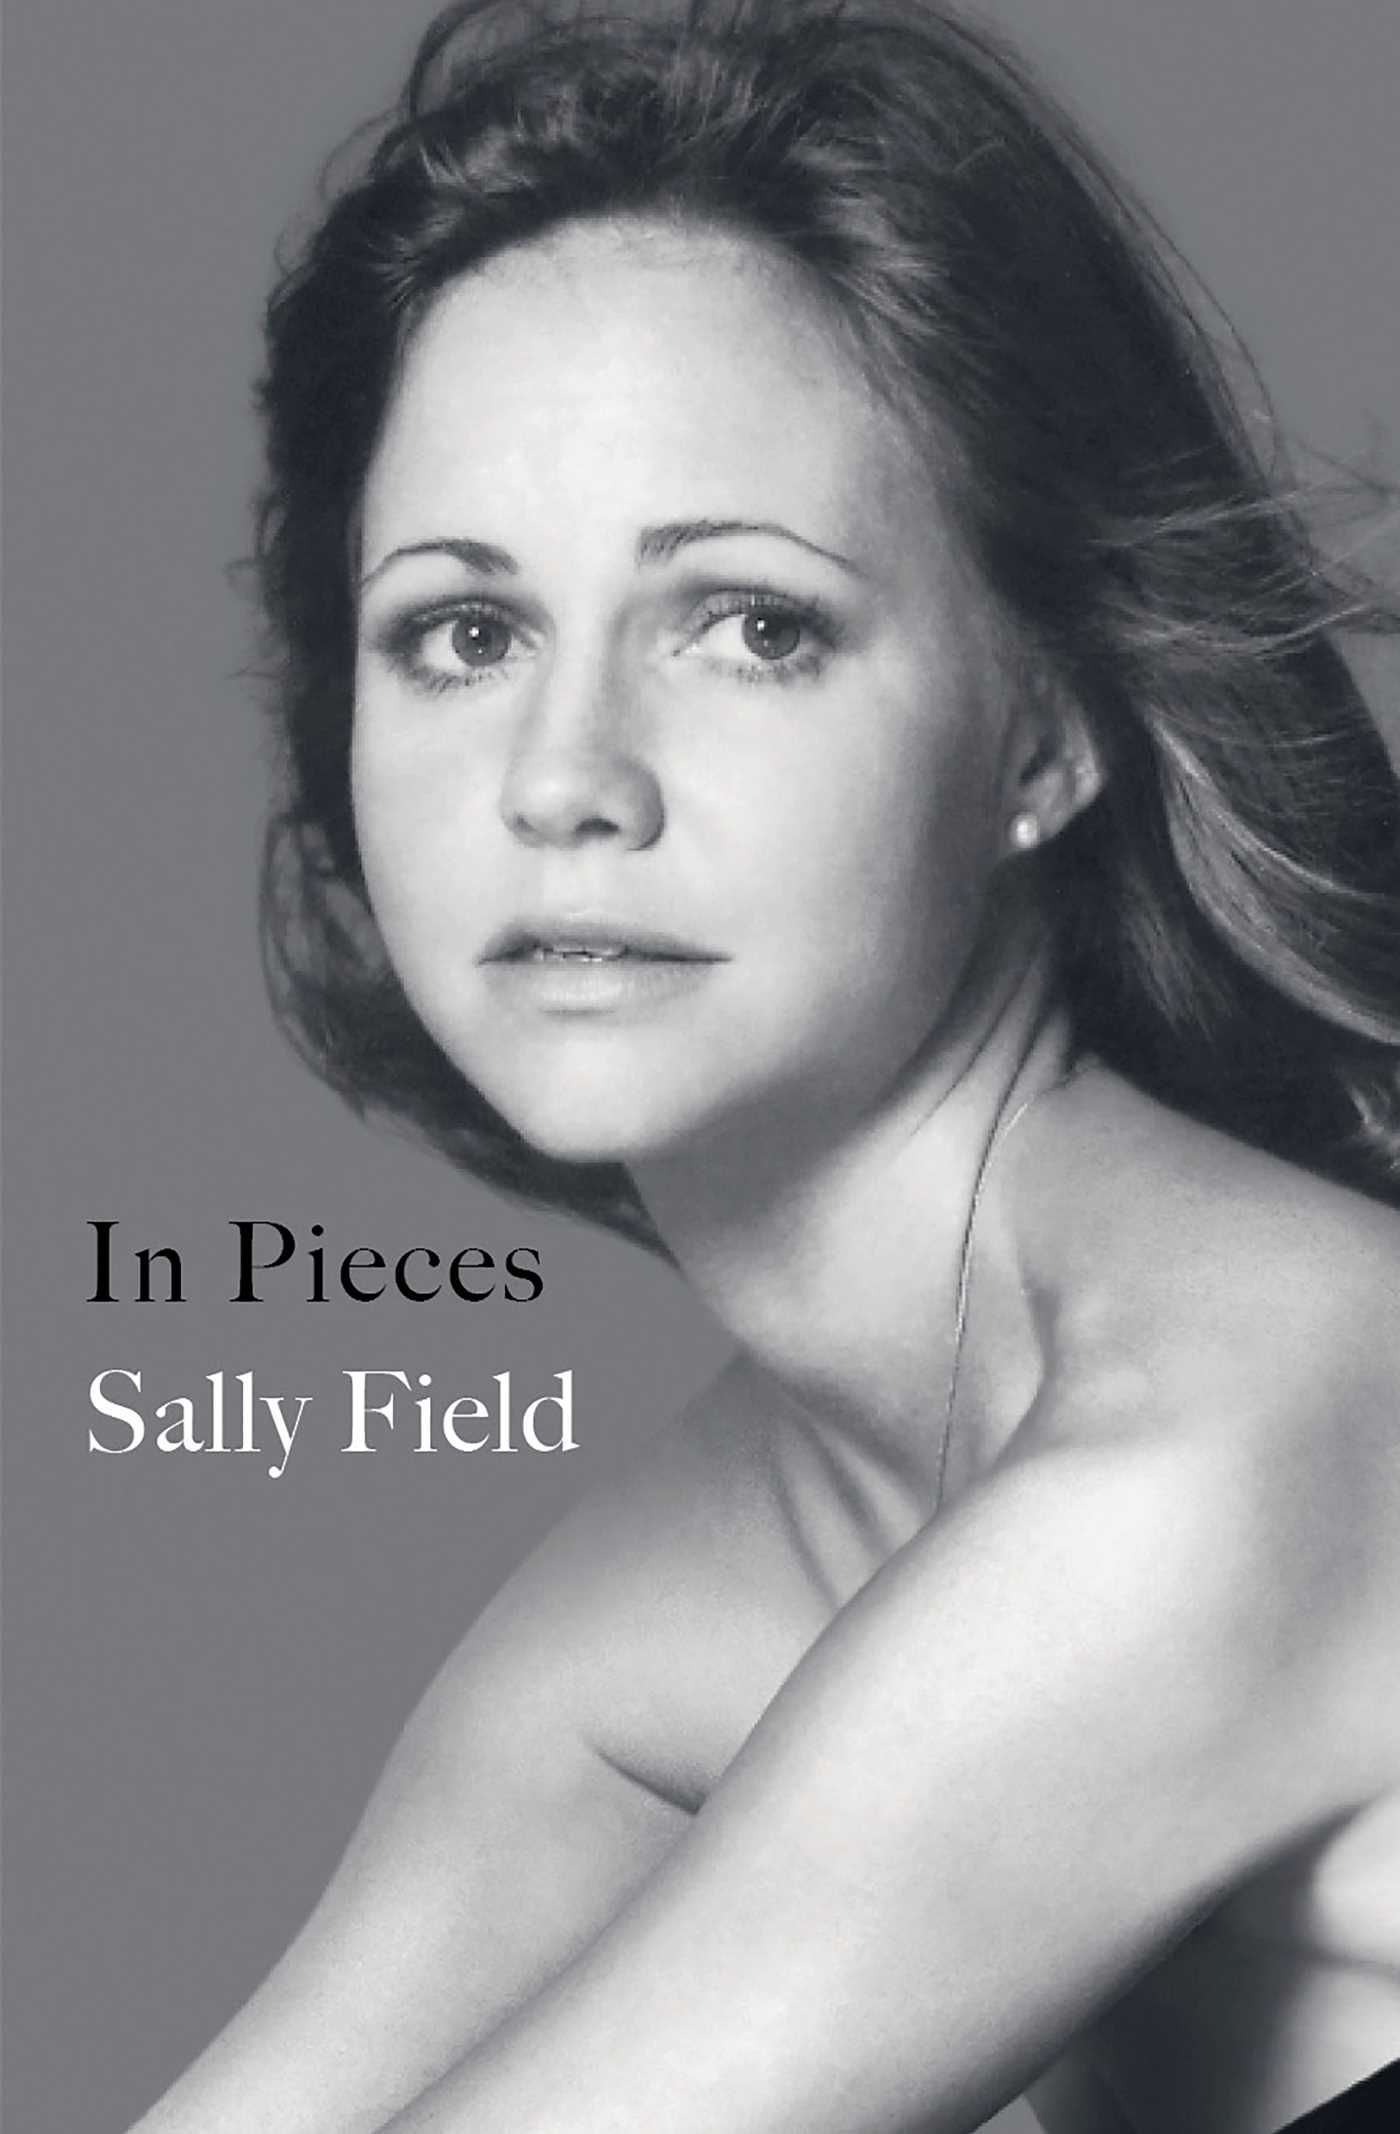 In Pieces by Sally Field